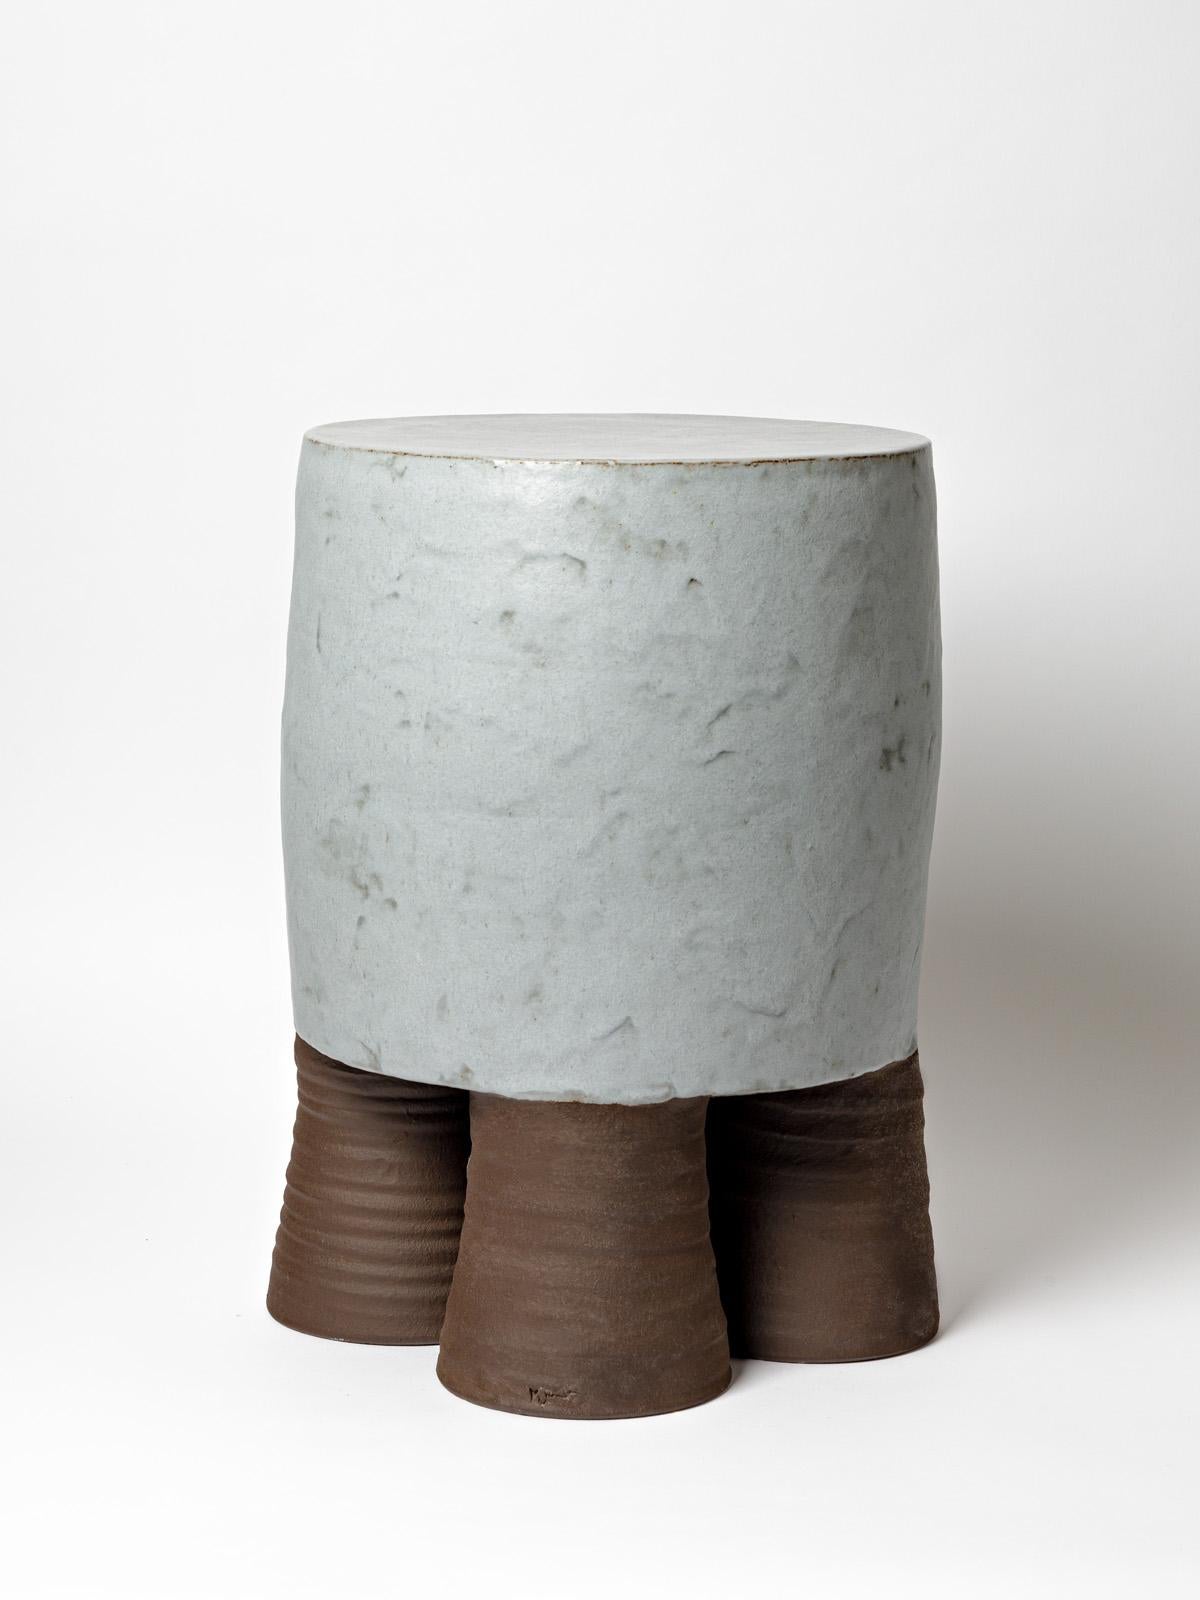 French Ceramic Stool or Table with Glazes Decoration by Mia Jensen, circa 2022 For Sale